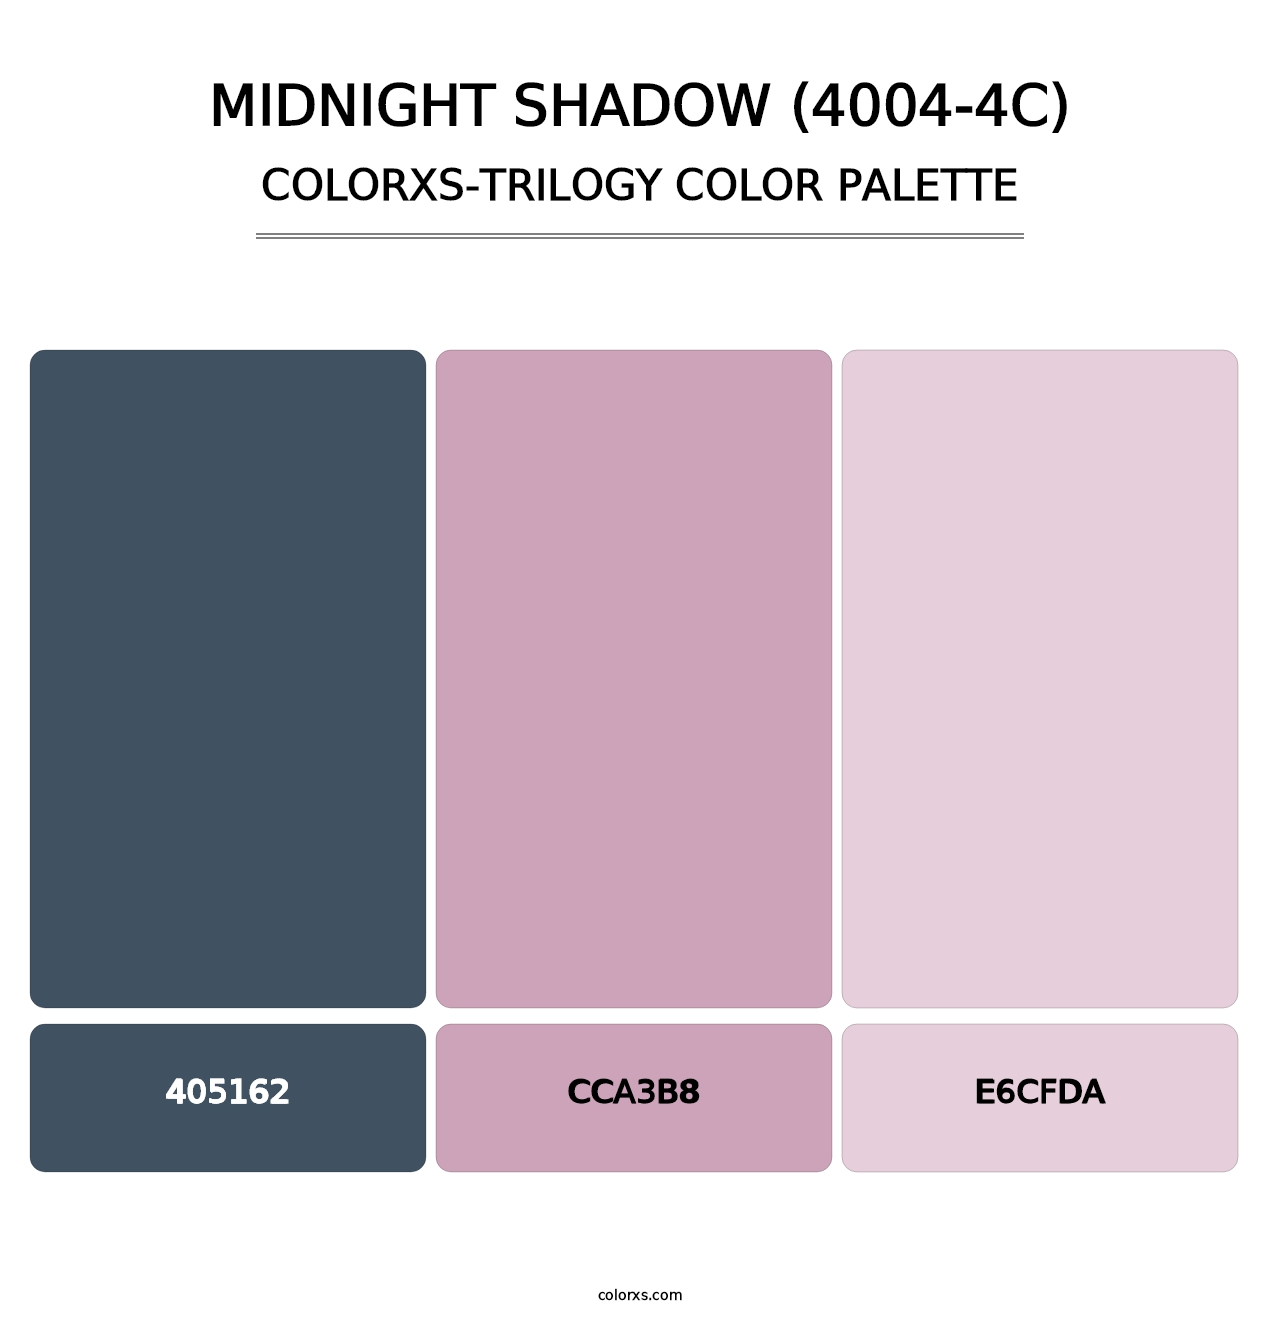 Midnight Shadow (4004-4C) - Colorxs Trilogy Palette